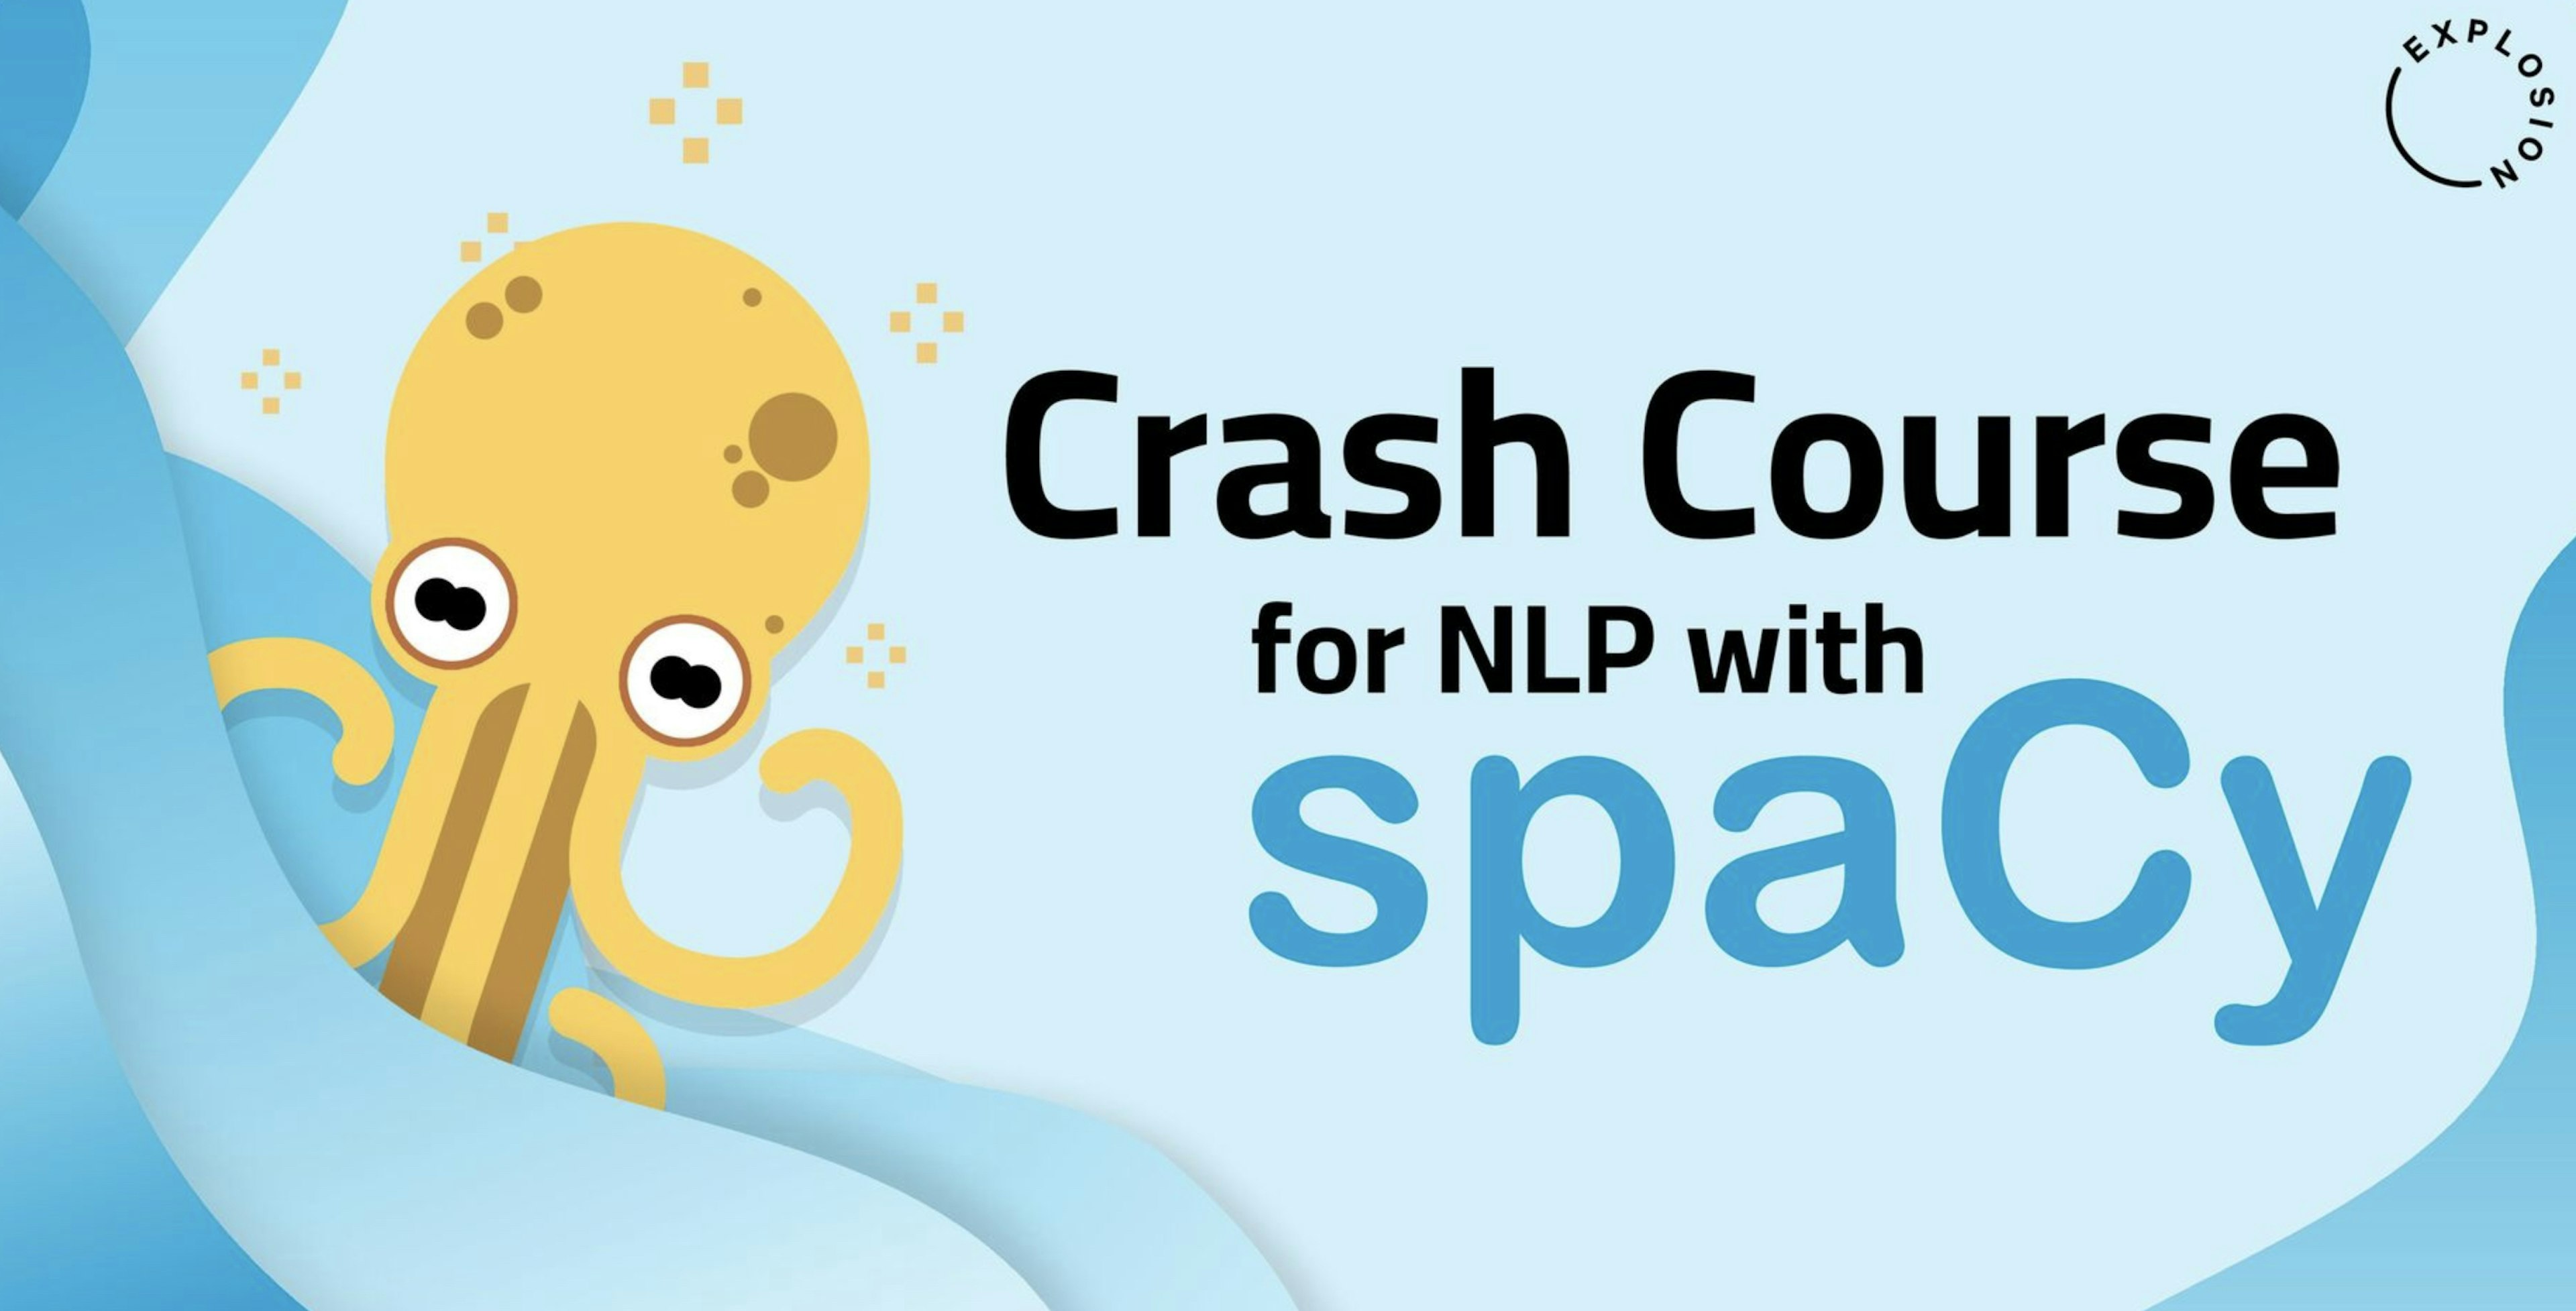 Intro to NLP with spaCy for Digital Humanities